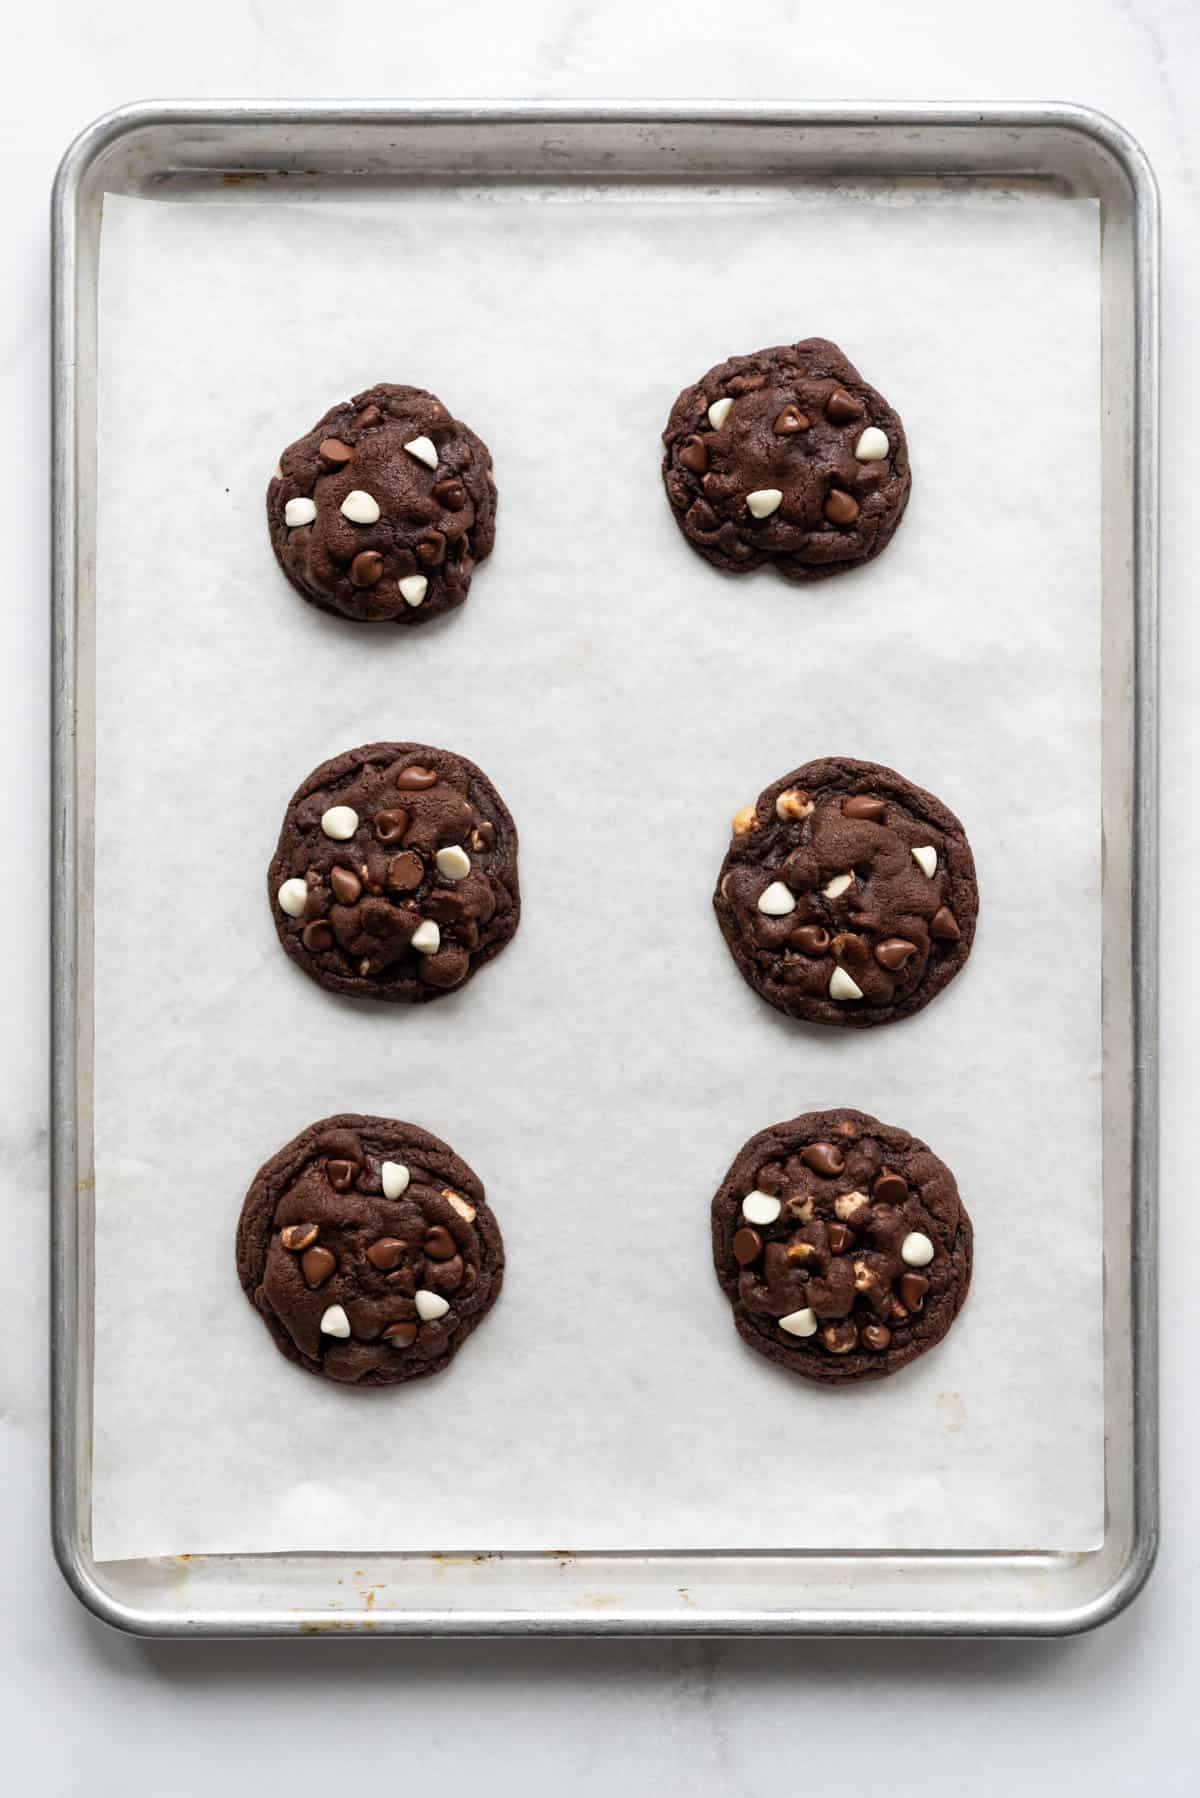 Six triple chocolate cookies on a baking sheet lined with parchment paper.